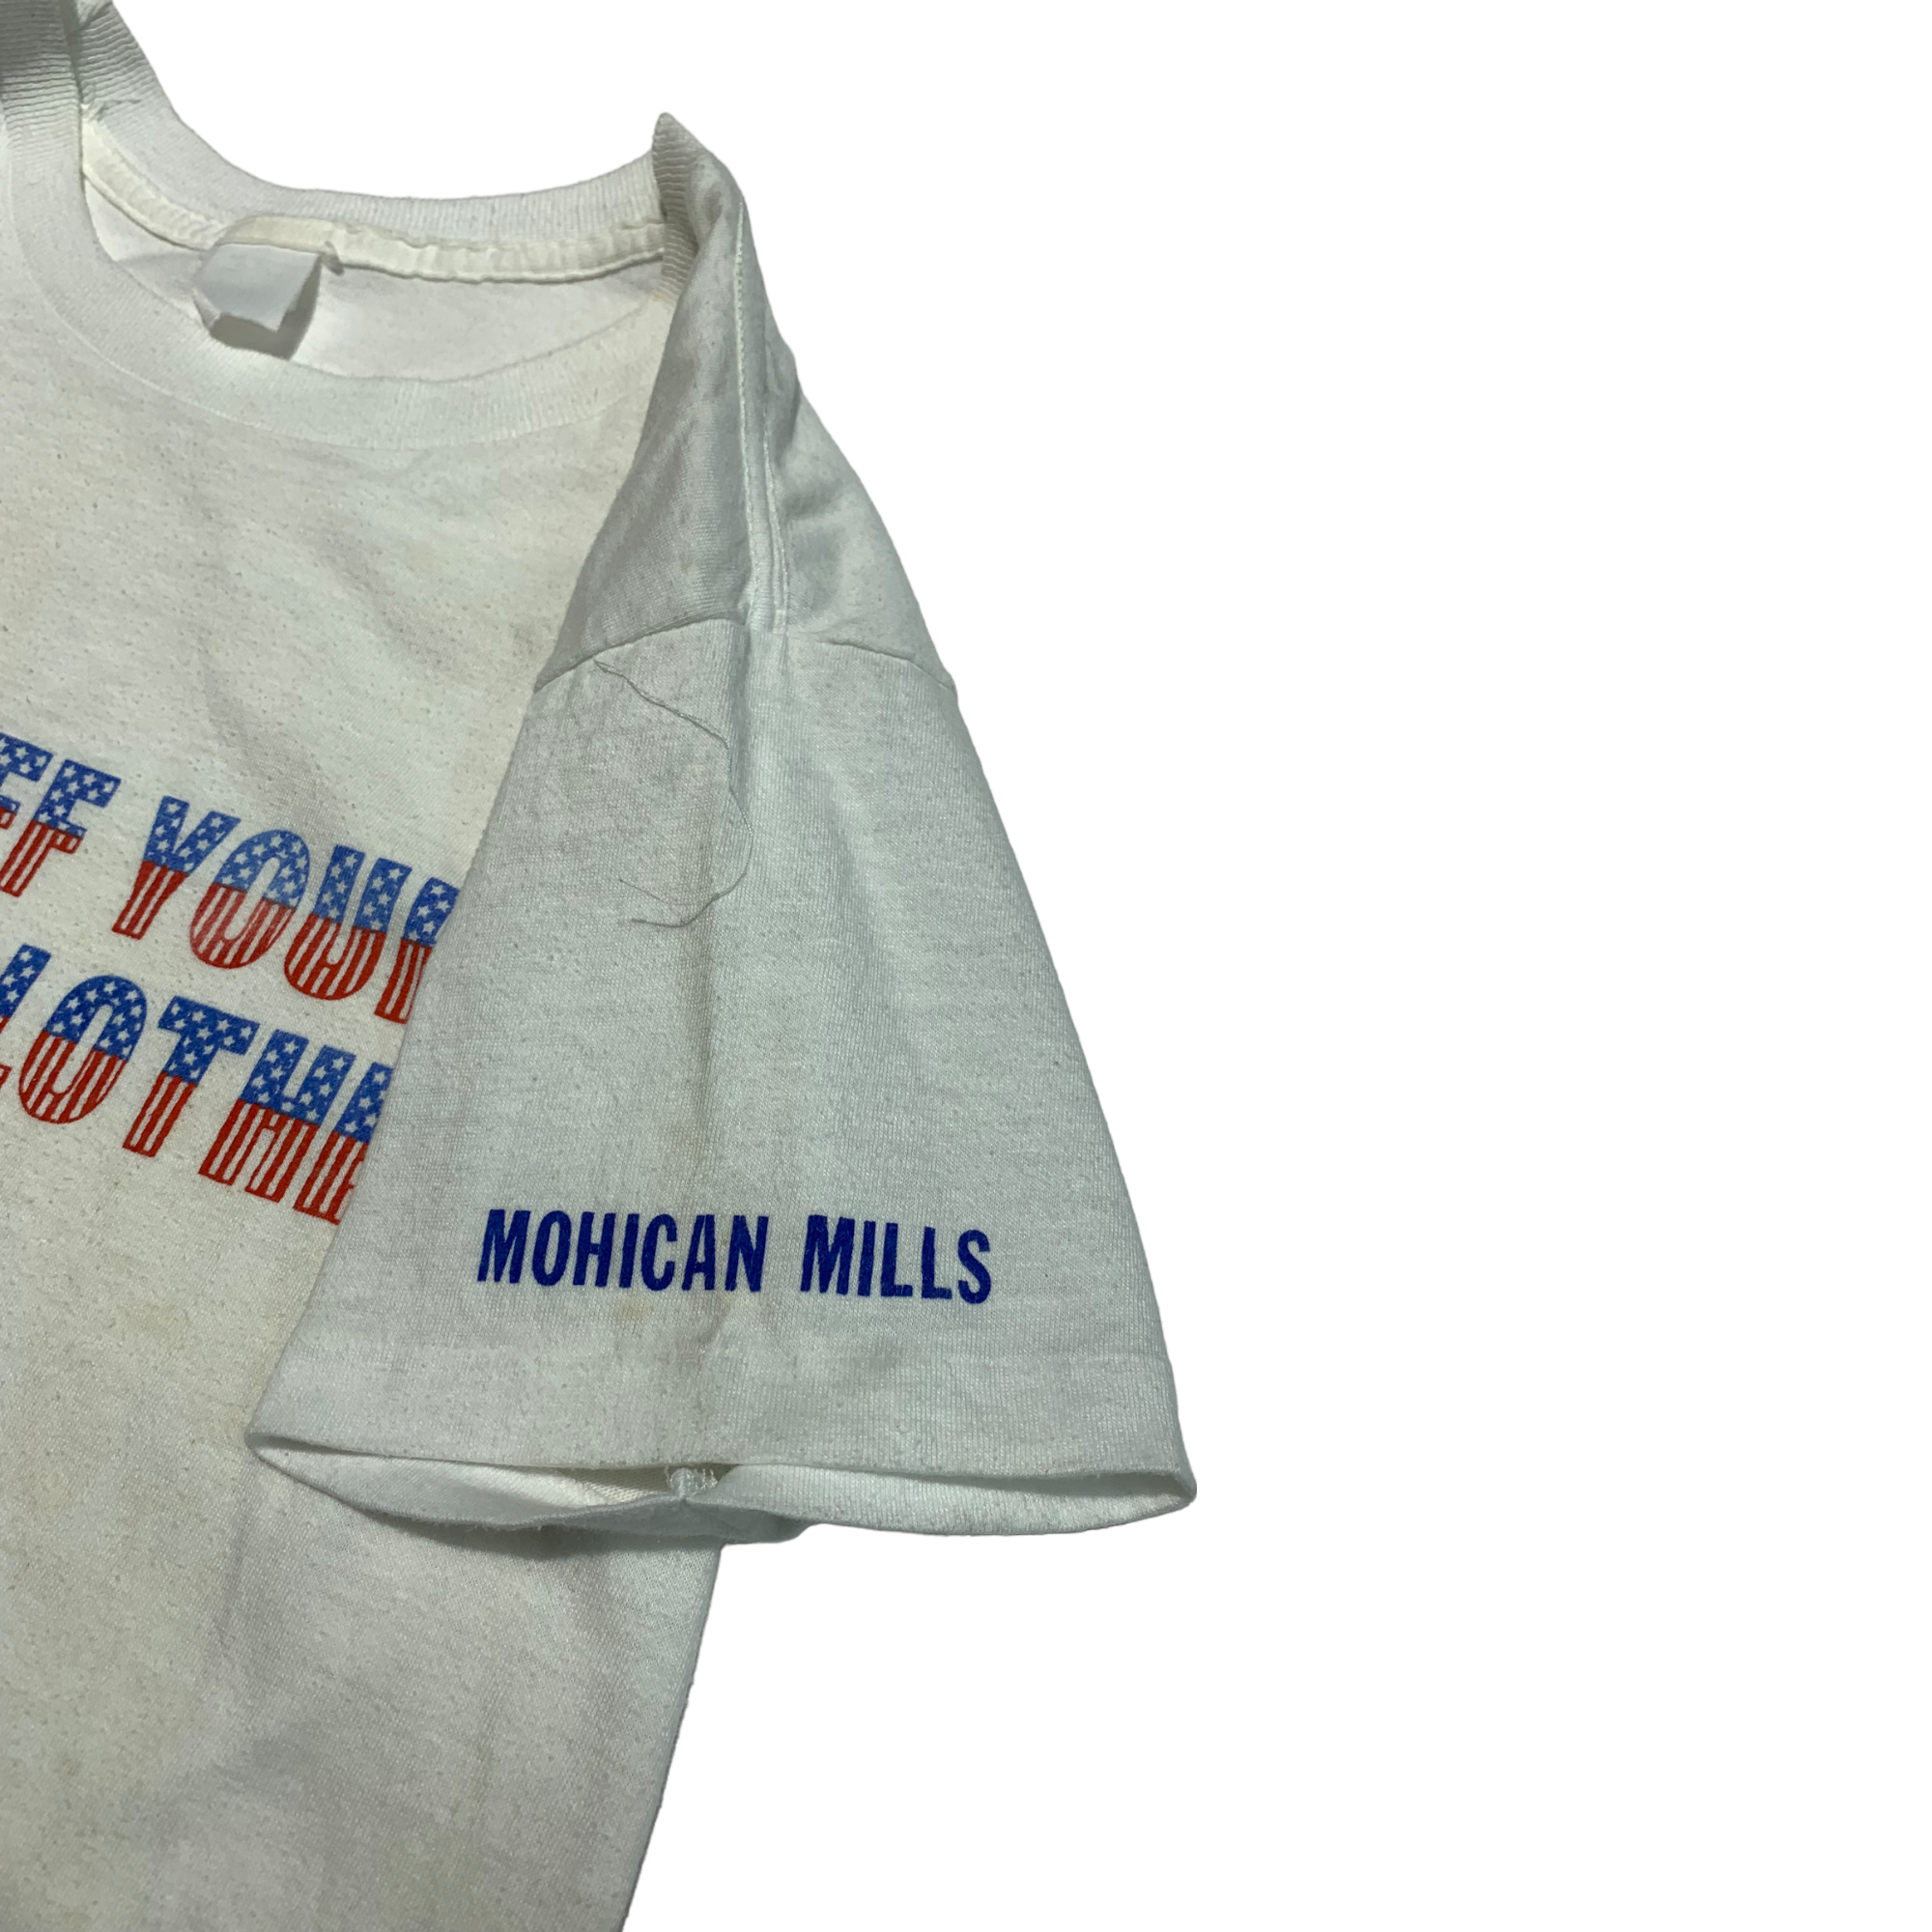 ‘Take Off Your Foreign Clothes’ 80s Textile Industry T-Shirt - Aged White - XS/S